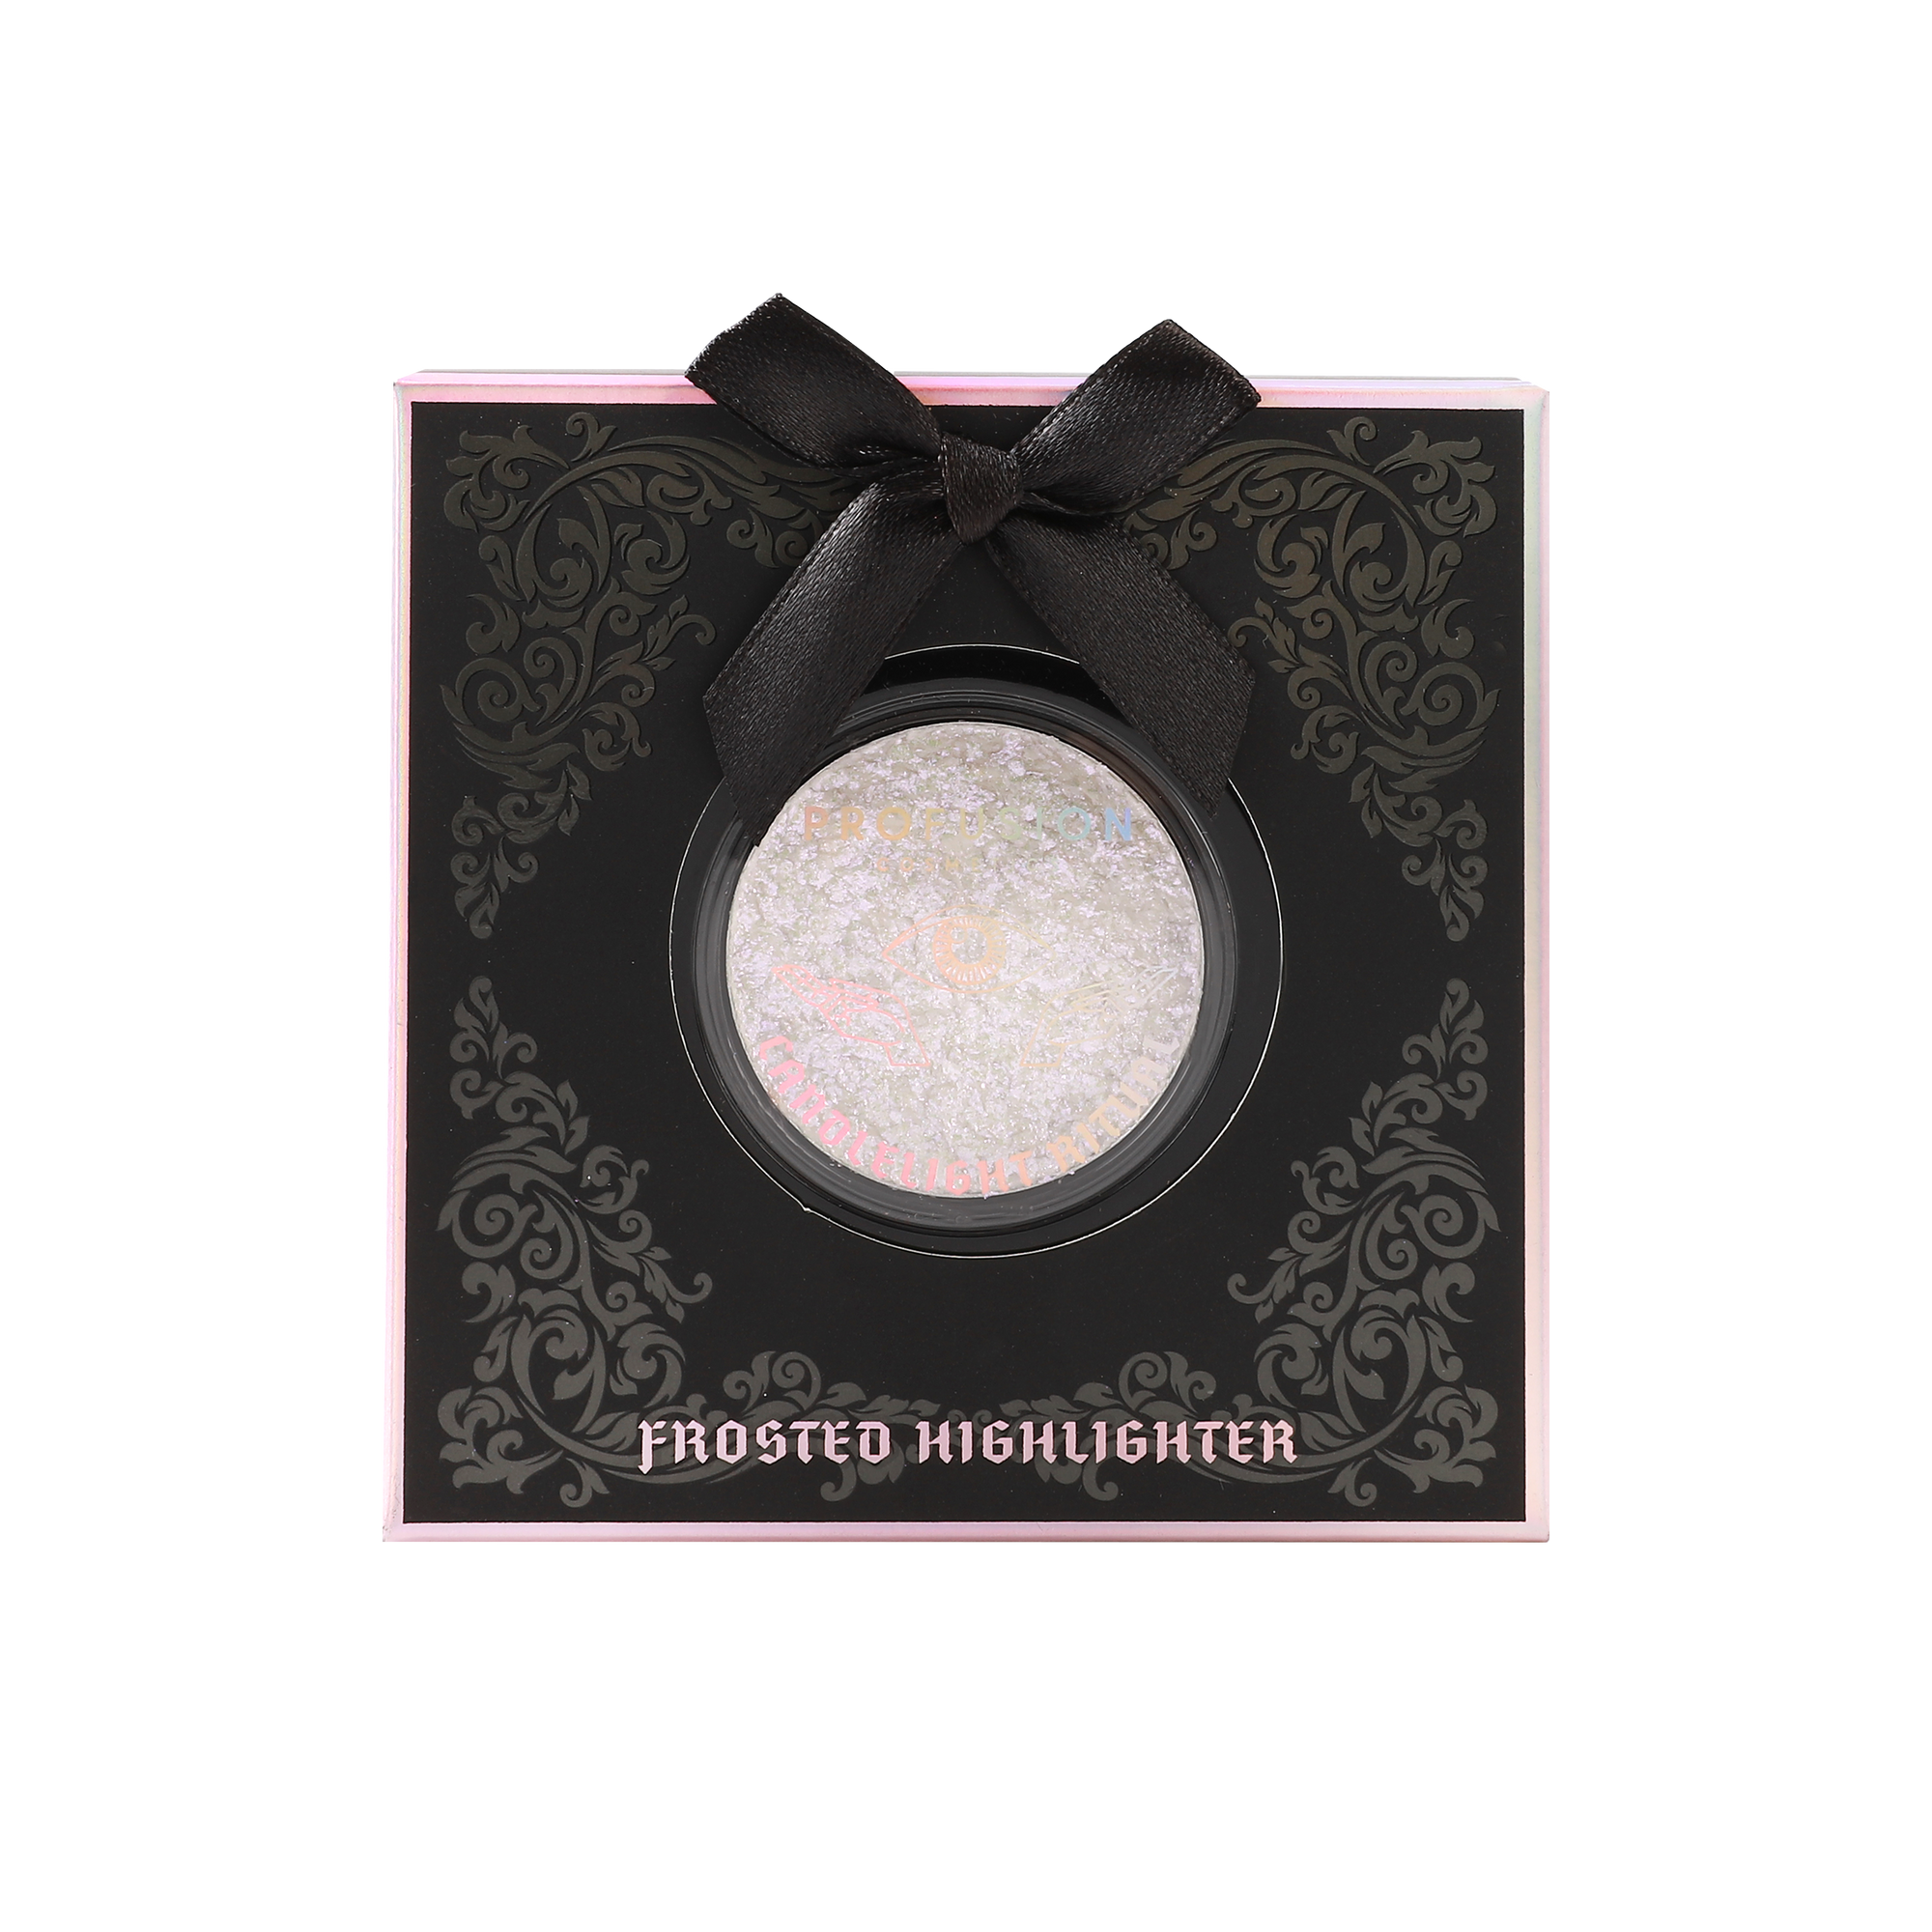 RITUALS | CANDLELIGHT FROSTED HIGHLIGHTER - FULL MOON